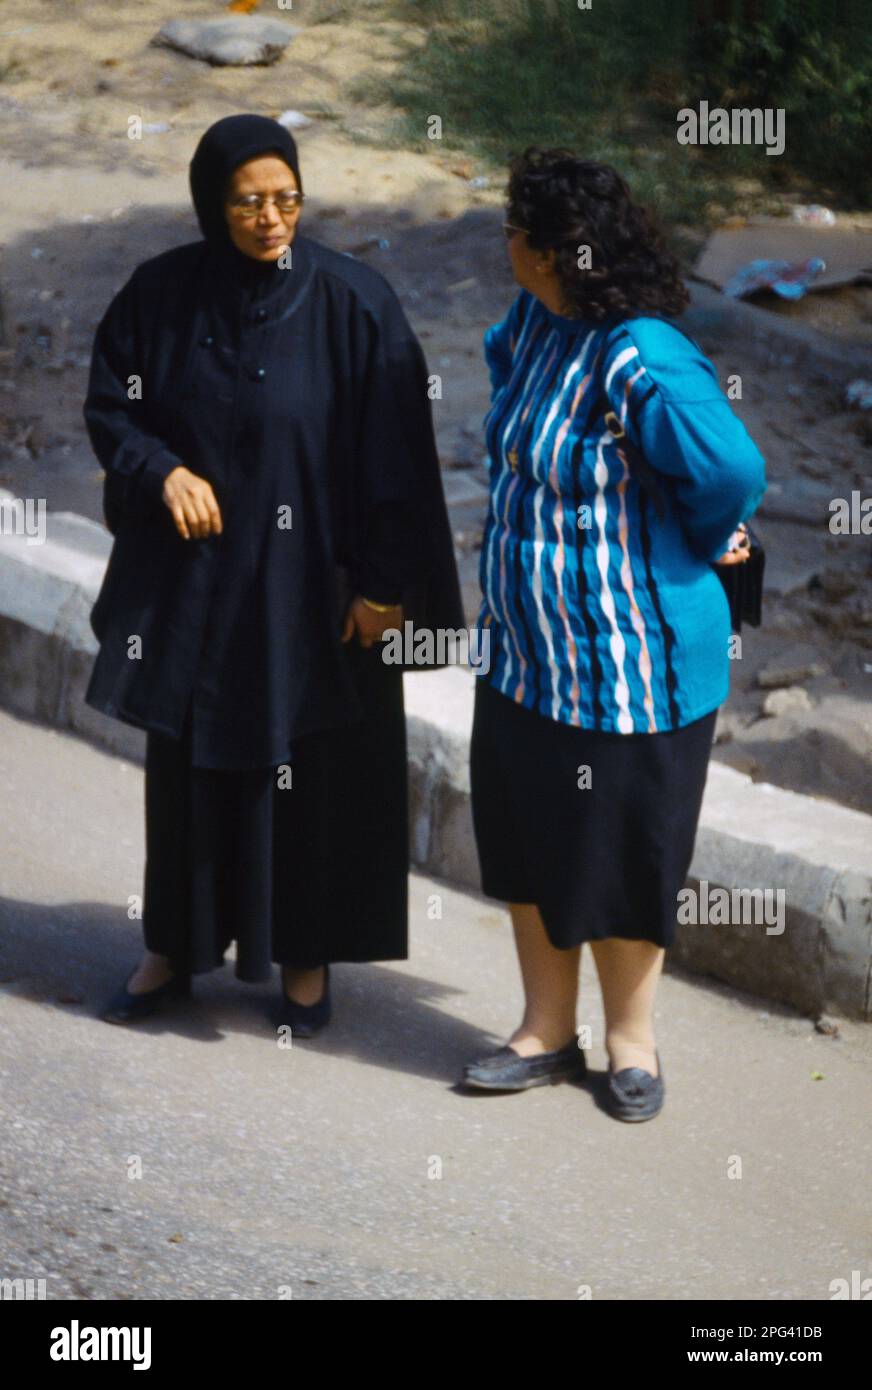 Luxor Egypt Two Women Having a Conversation in the Street - Western and Traditional Dress Stock Photo